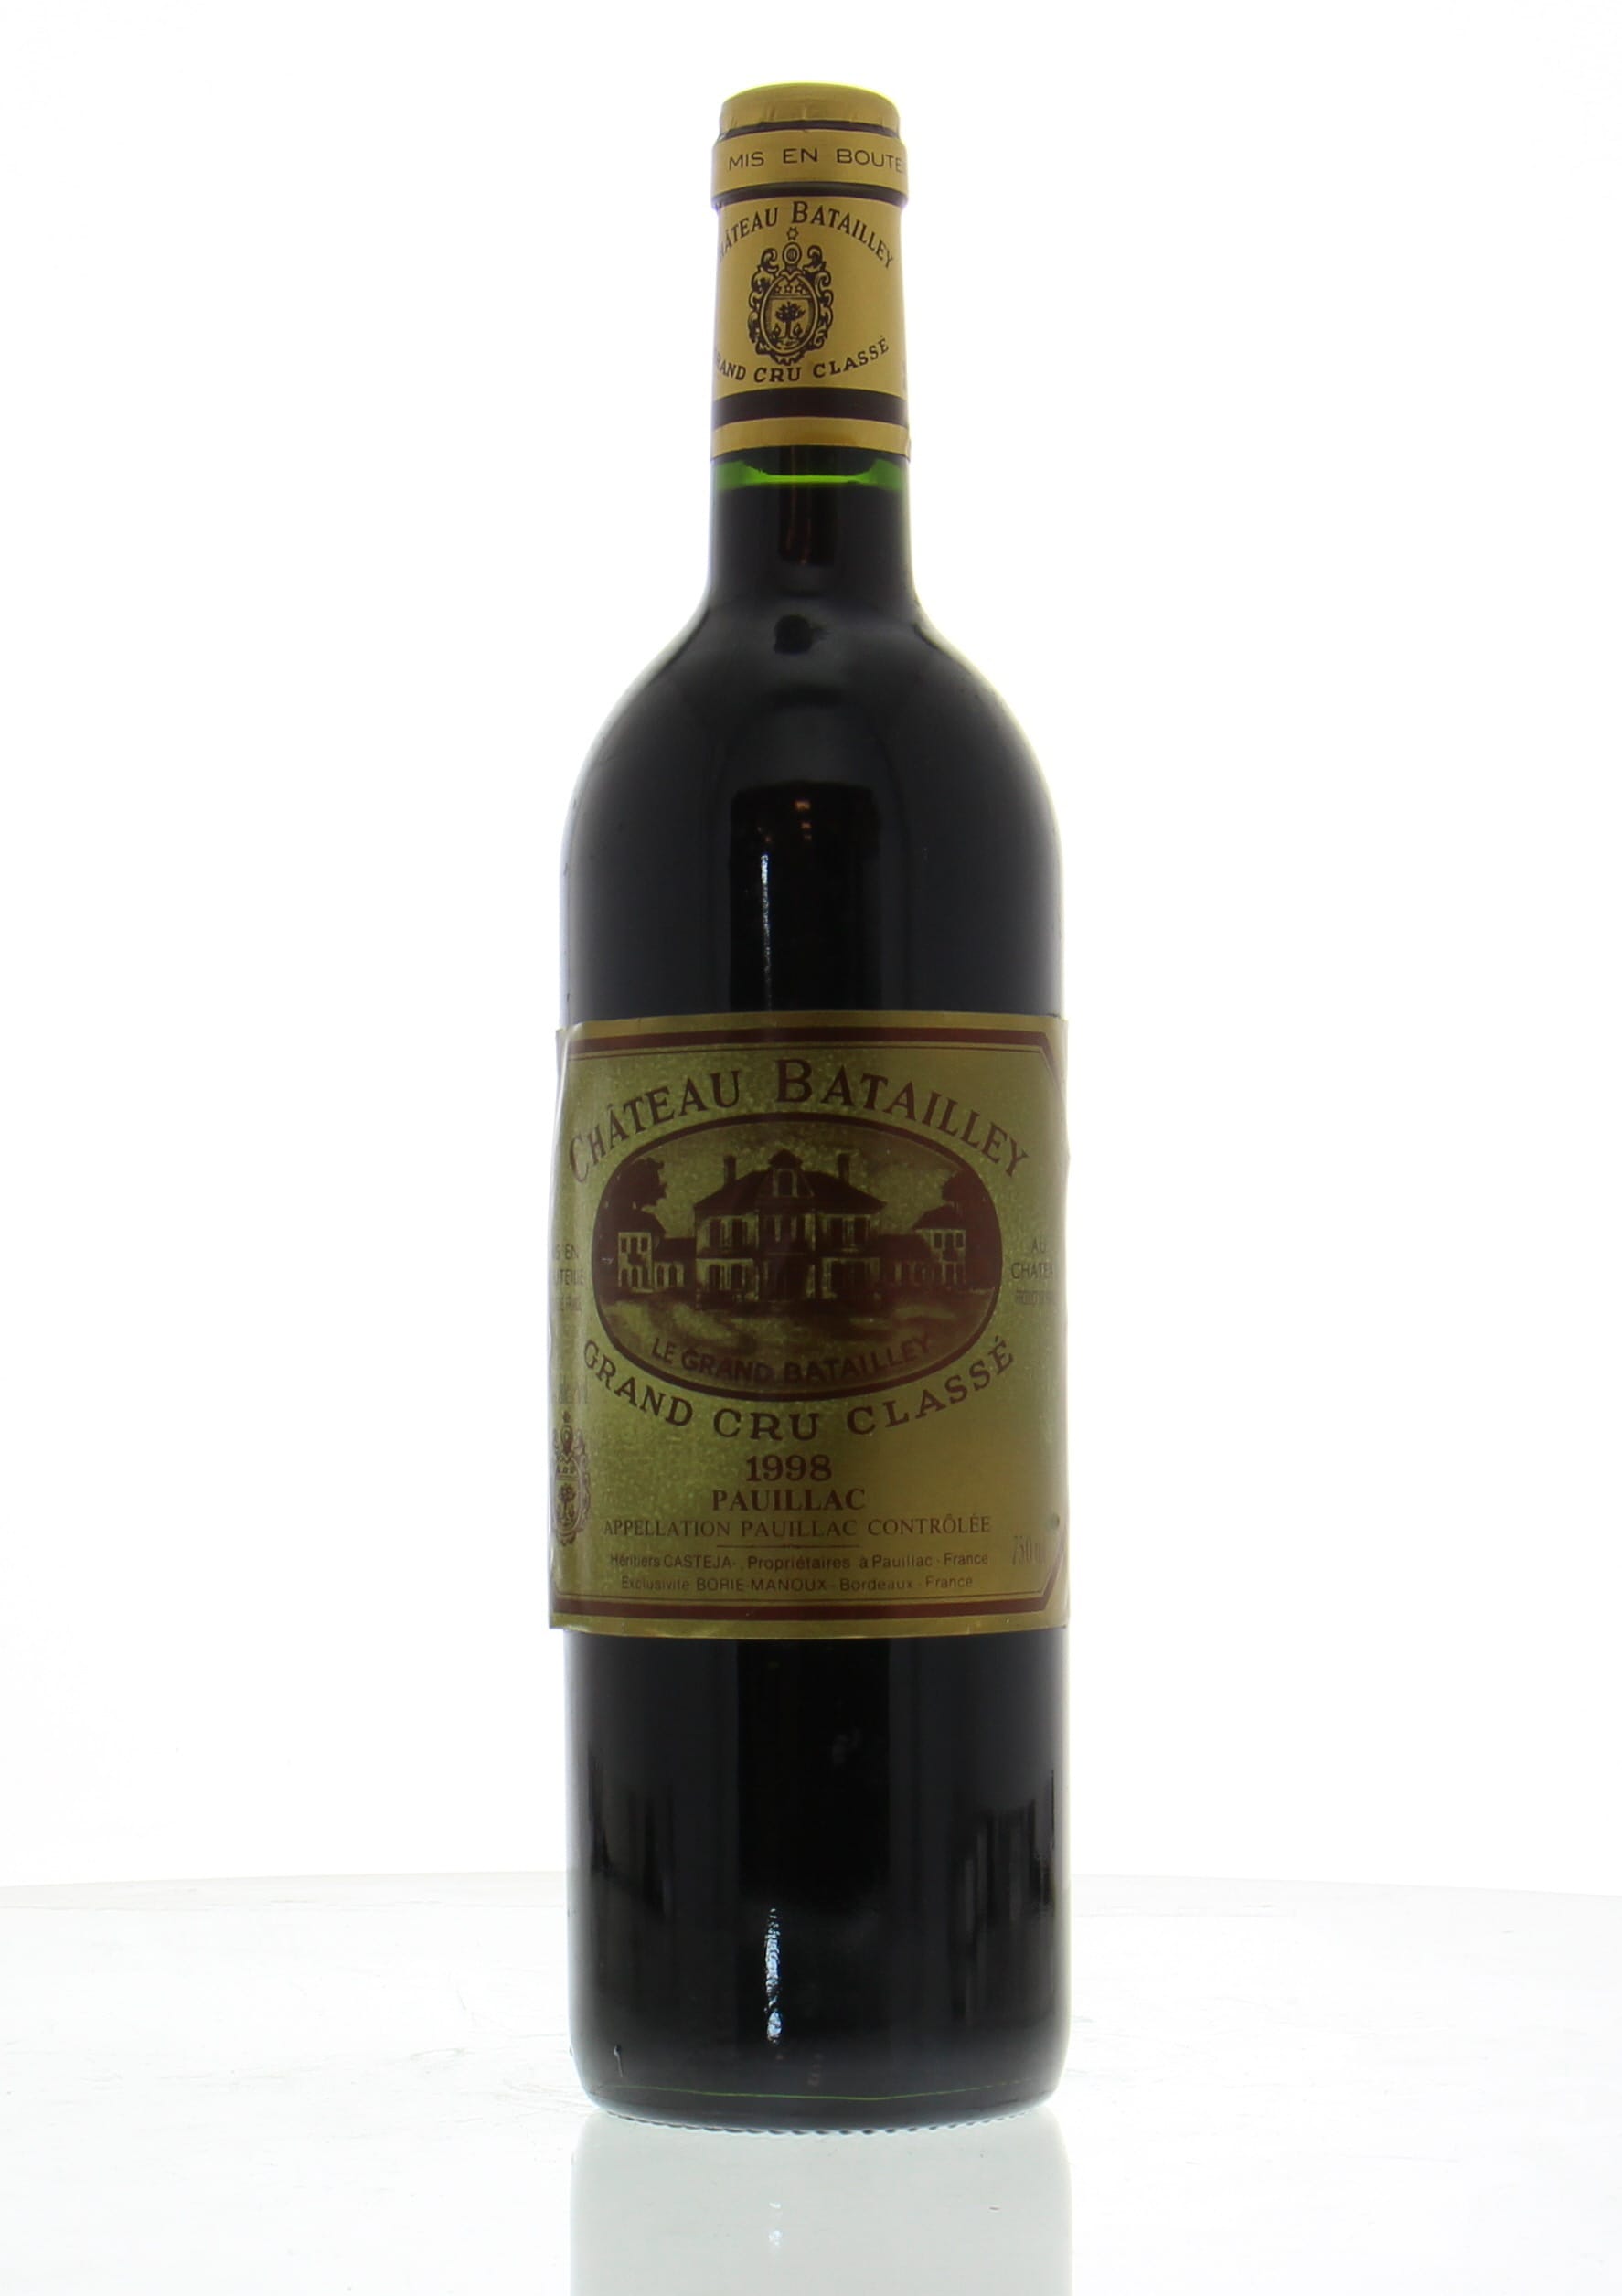 Chateau Batailley - Chateau Batailley 1998 Perfect